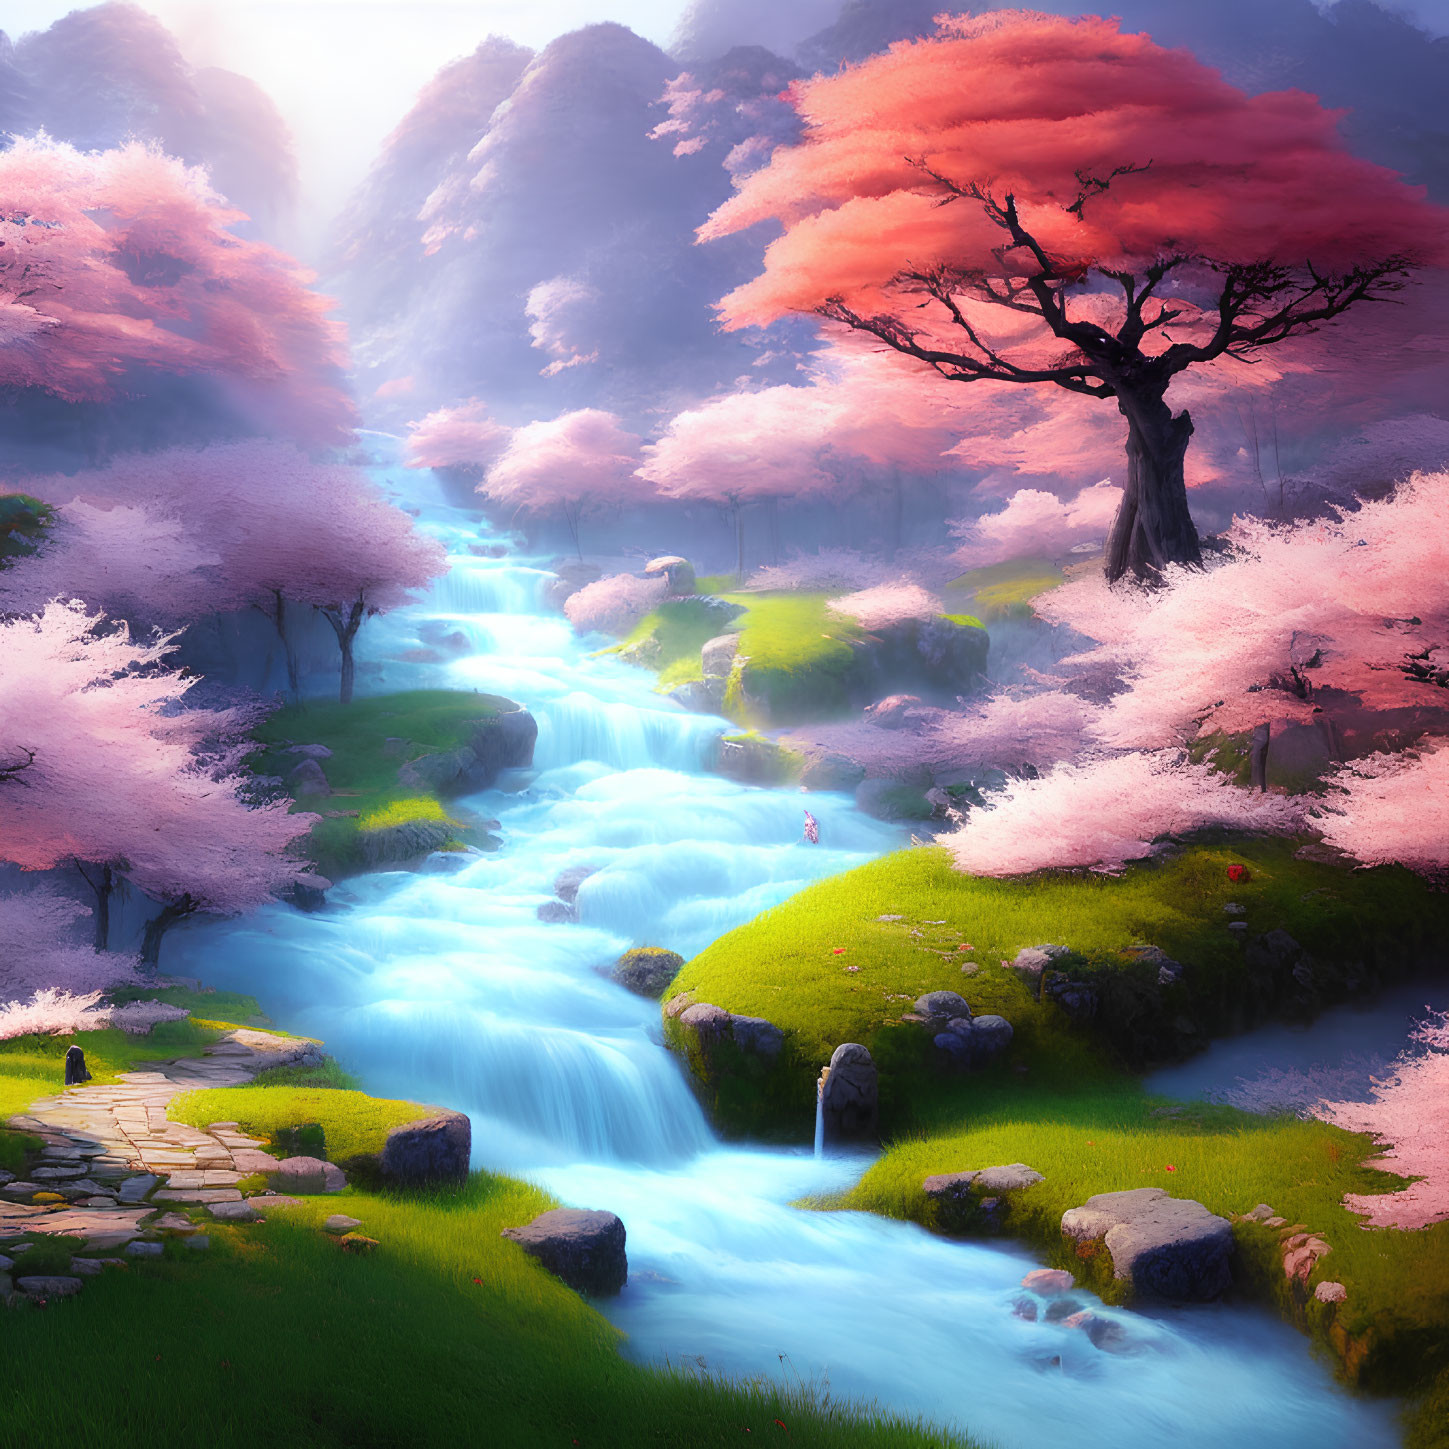 Tranquil blue stream with cherry blossoms and stone path